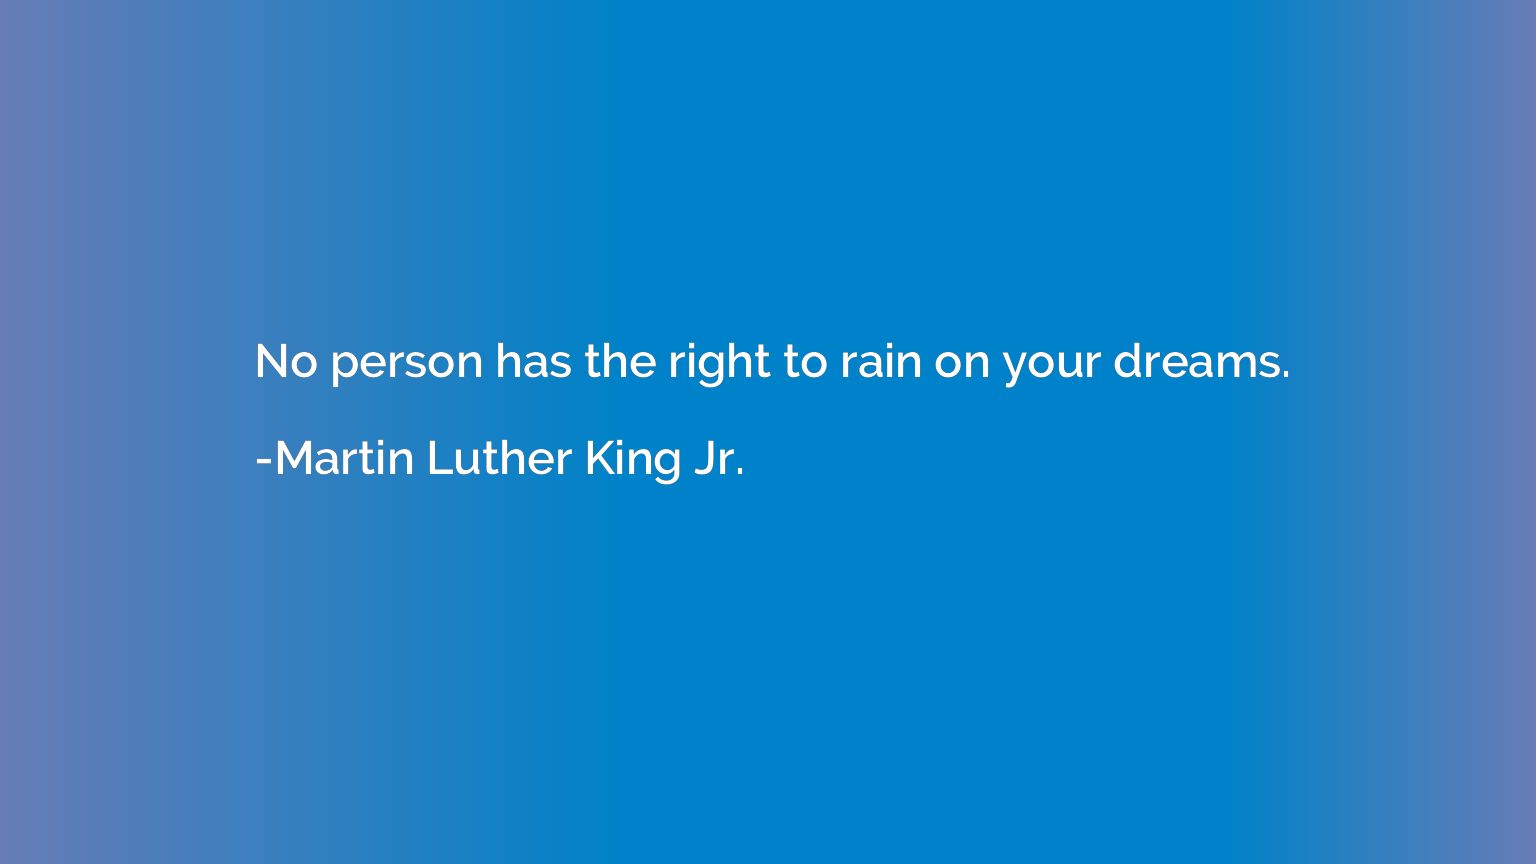 No person has the right to rain on your dreams.